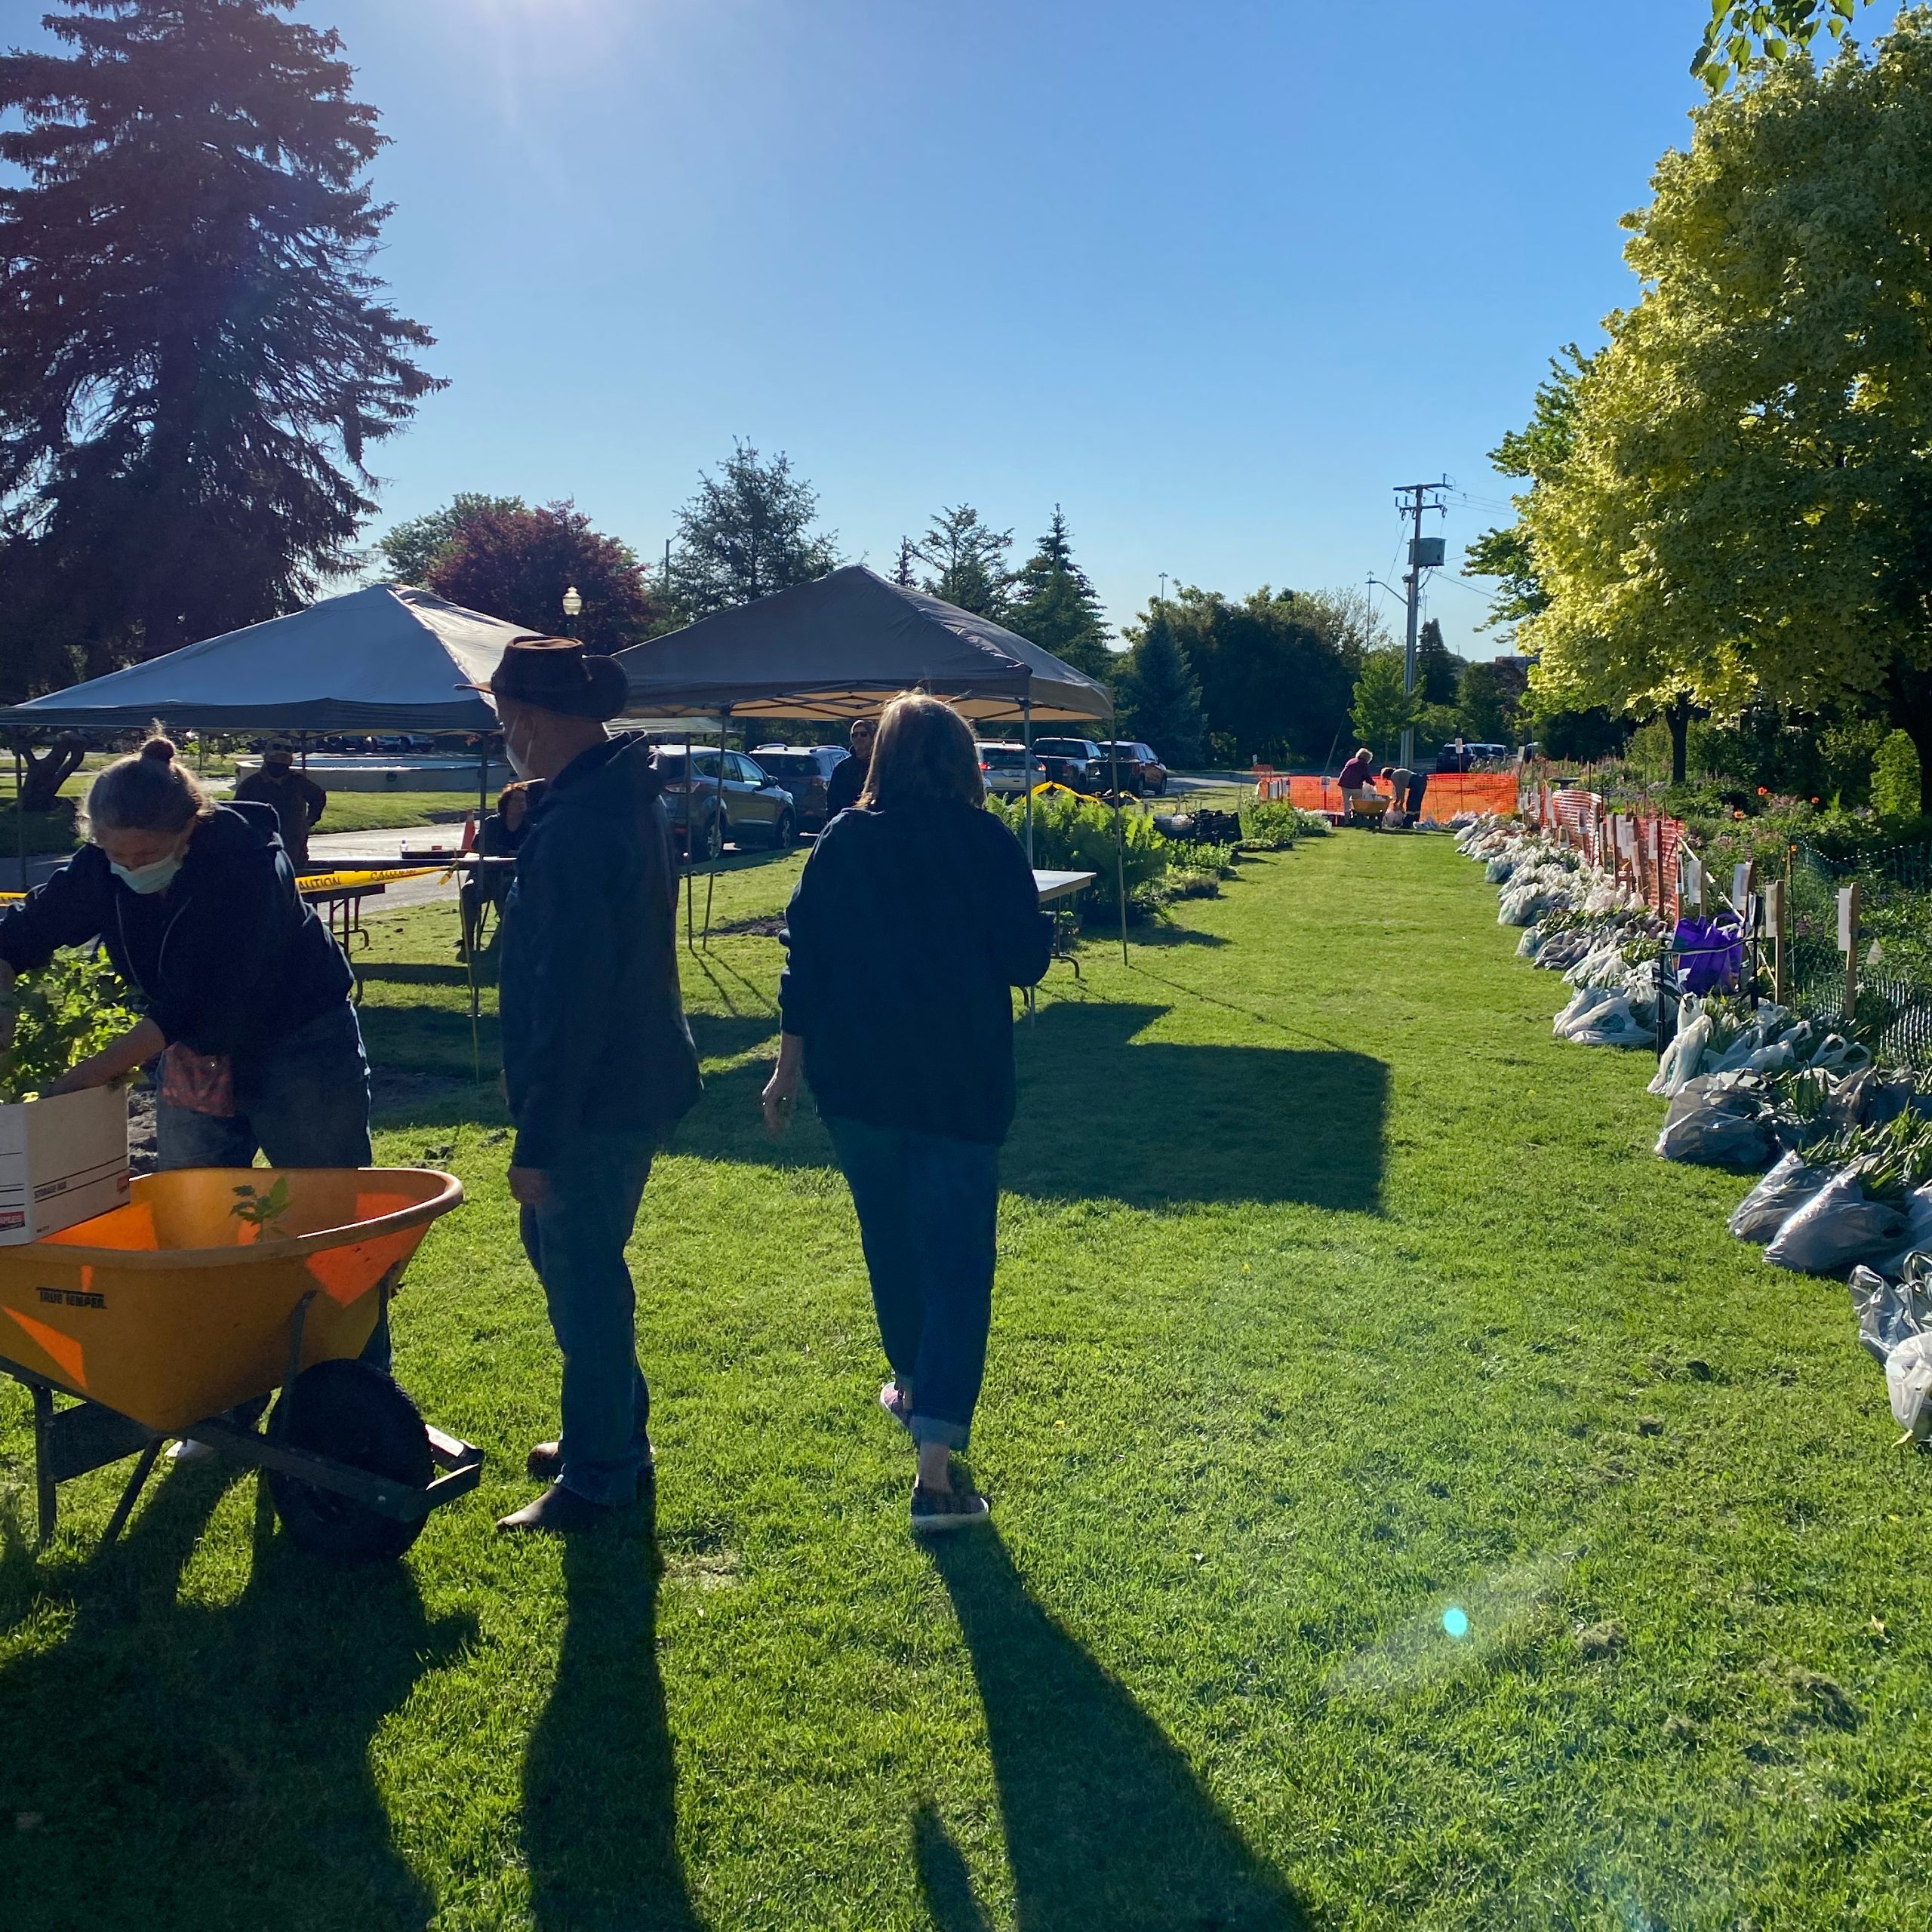 People standing in a grassy area of Rockway Gardens, setting up the bulb sale